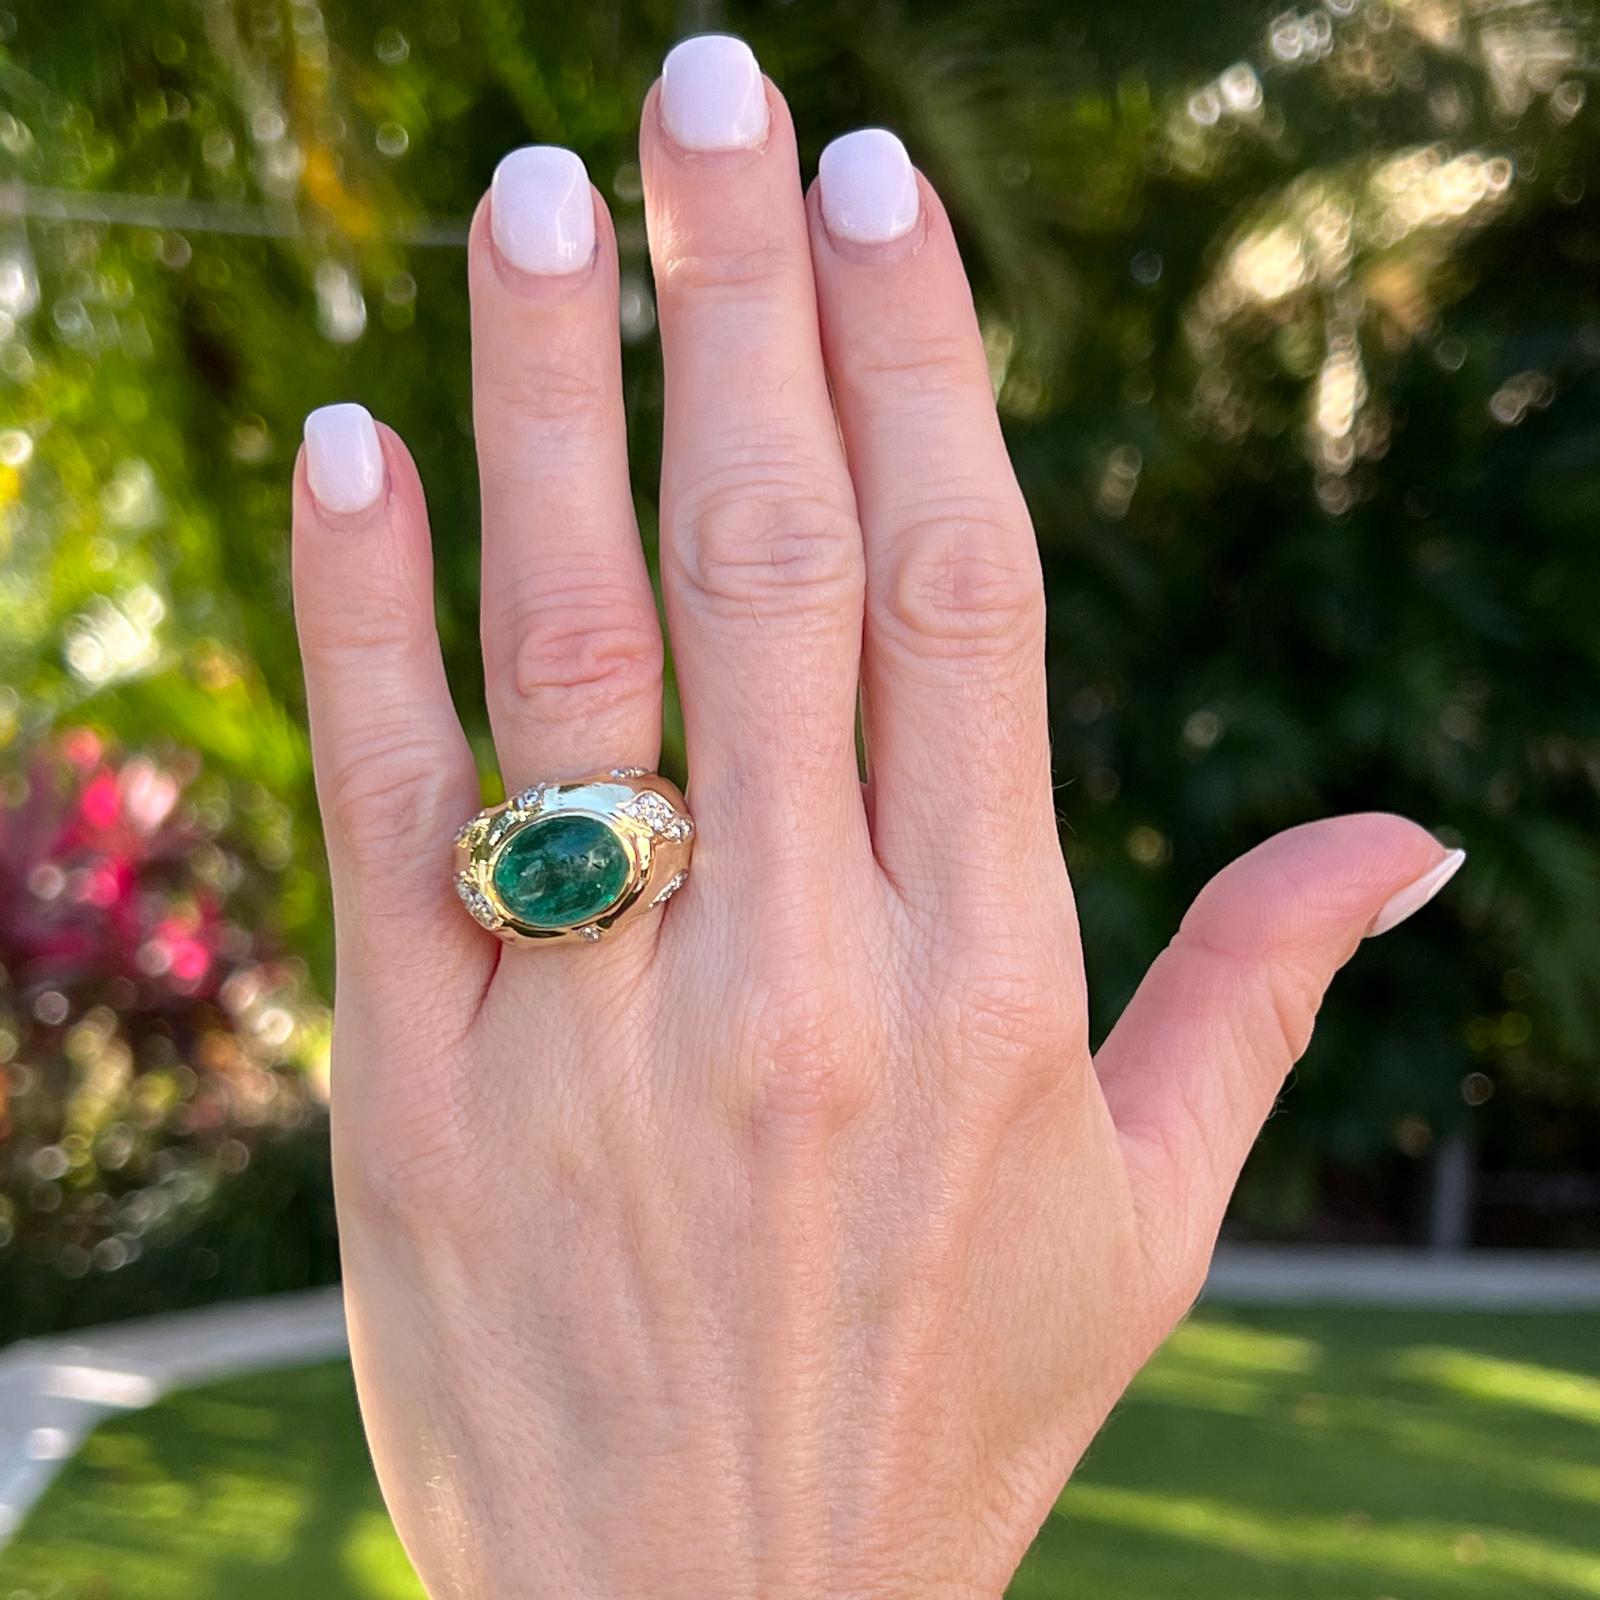 Emerald diamond cocktail ring handcrafted in 18 karat yellow gold. The cabochon oval emerald weighs approximately 6.0 carats and is bezel set with 30 surrounding round brilliant cut diamonds weighing approximately .50 carat total weight. The